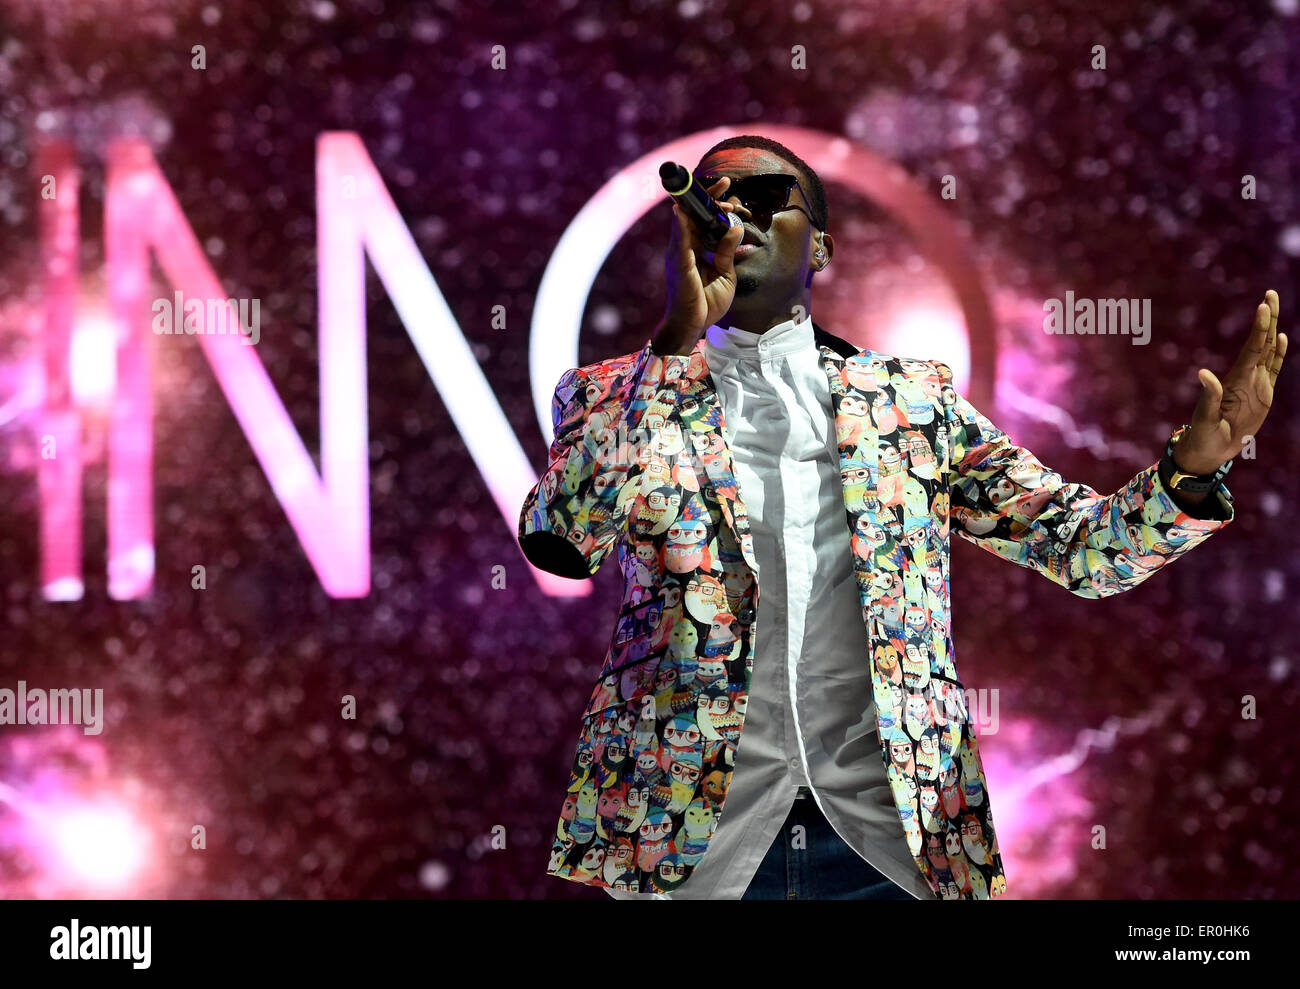 Munich, Germany. 23rd May, 2015. HANDOUT: Singer Omi performs during the FC Bayern Muenchen Champions dinner at Postpalast on May 23, 2015 in Munich, Germany. Photo by Lars Baron/Bongarts/Getty Images/FC Bayern/dpa (Editorial use only) Credit:  dpa/Alamy Live News Stock Photo